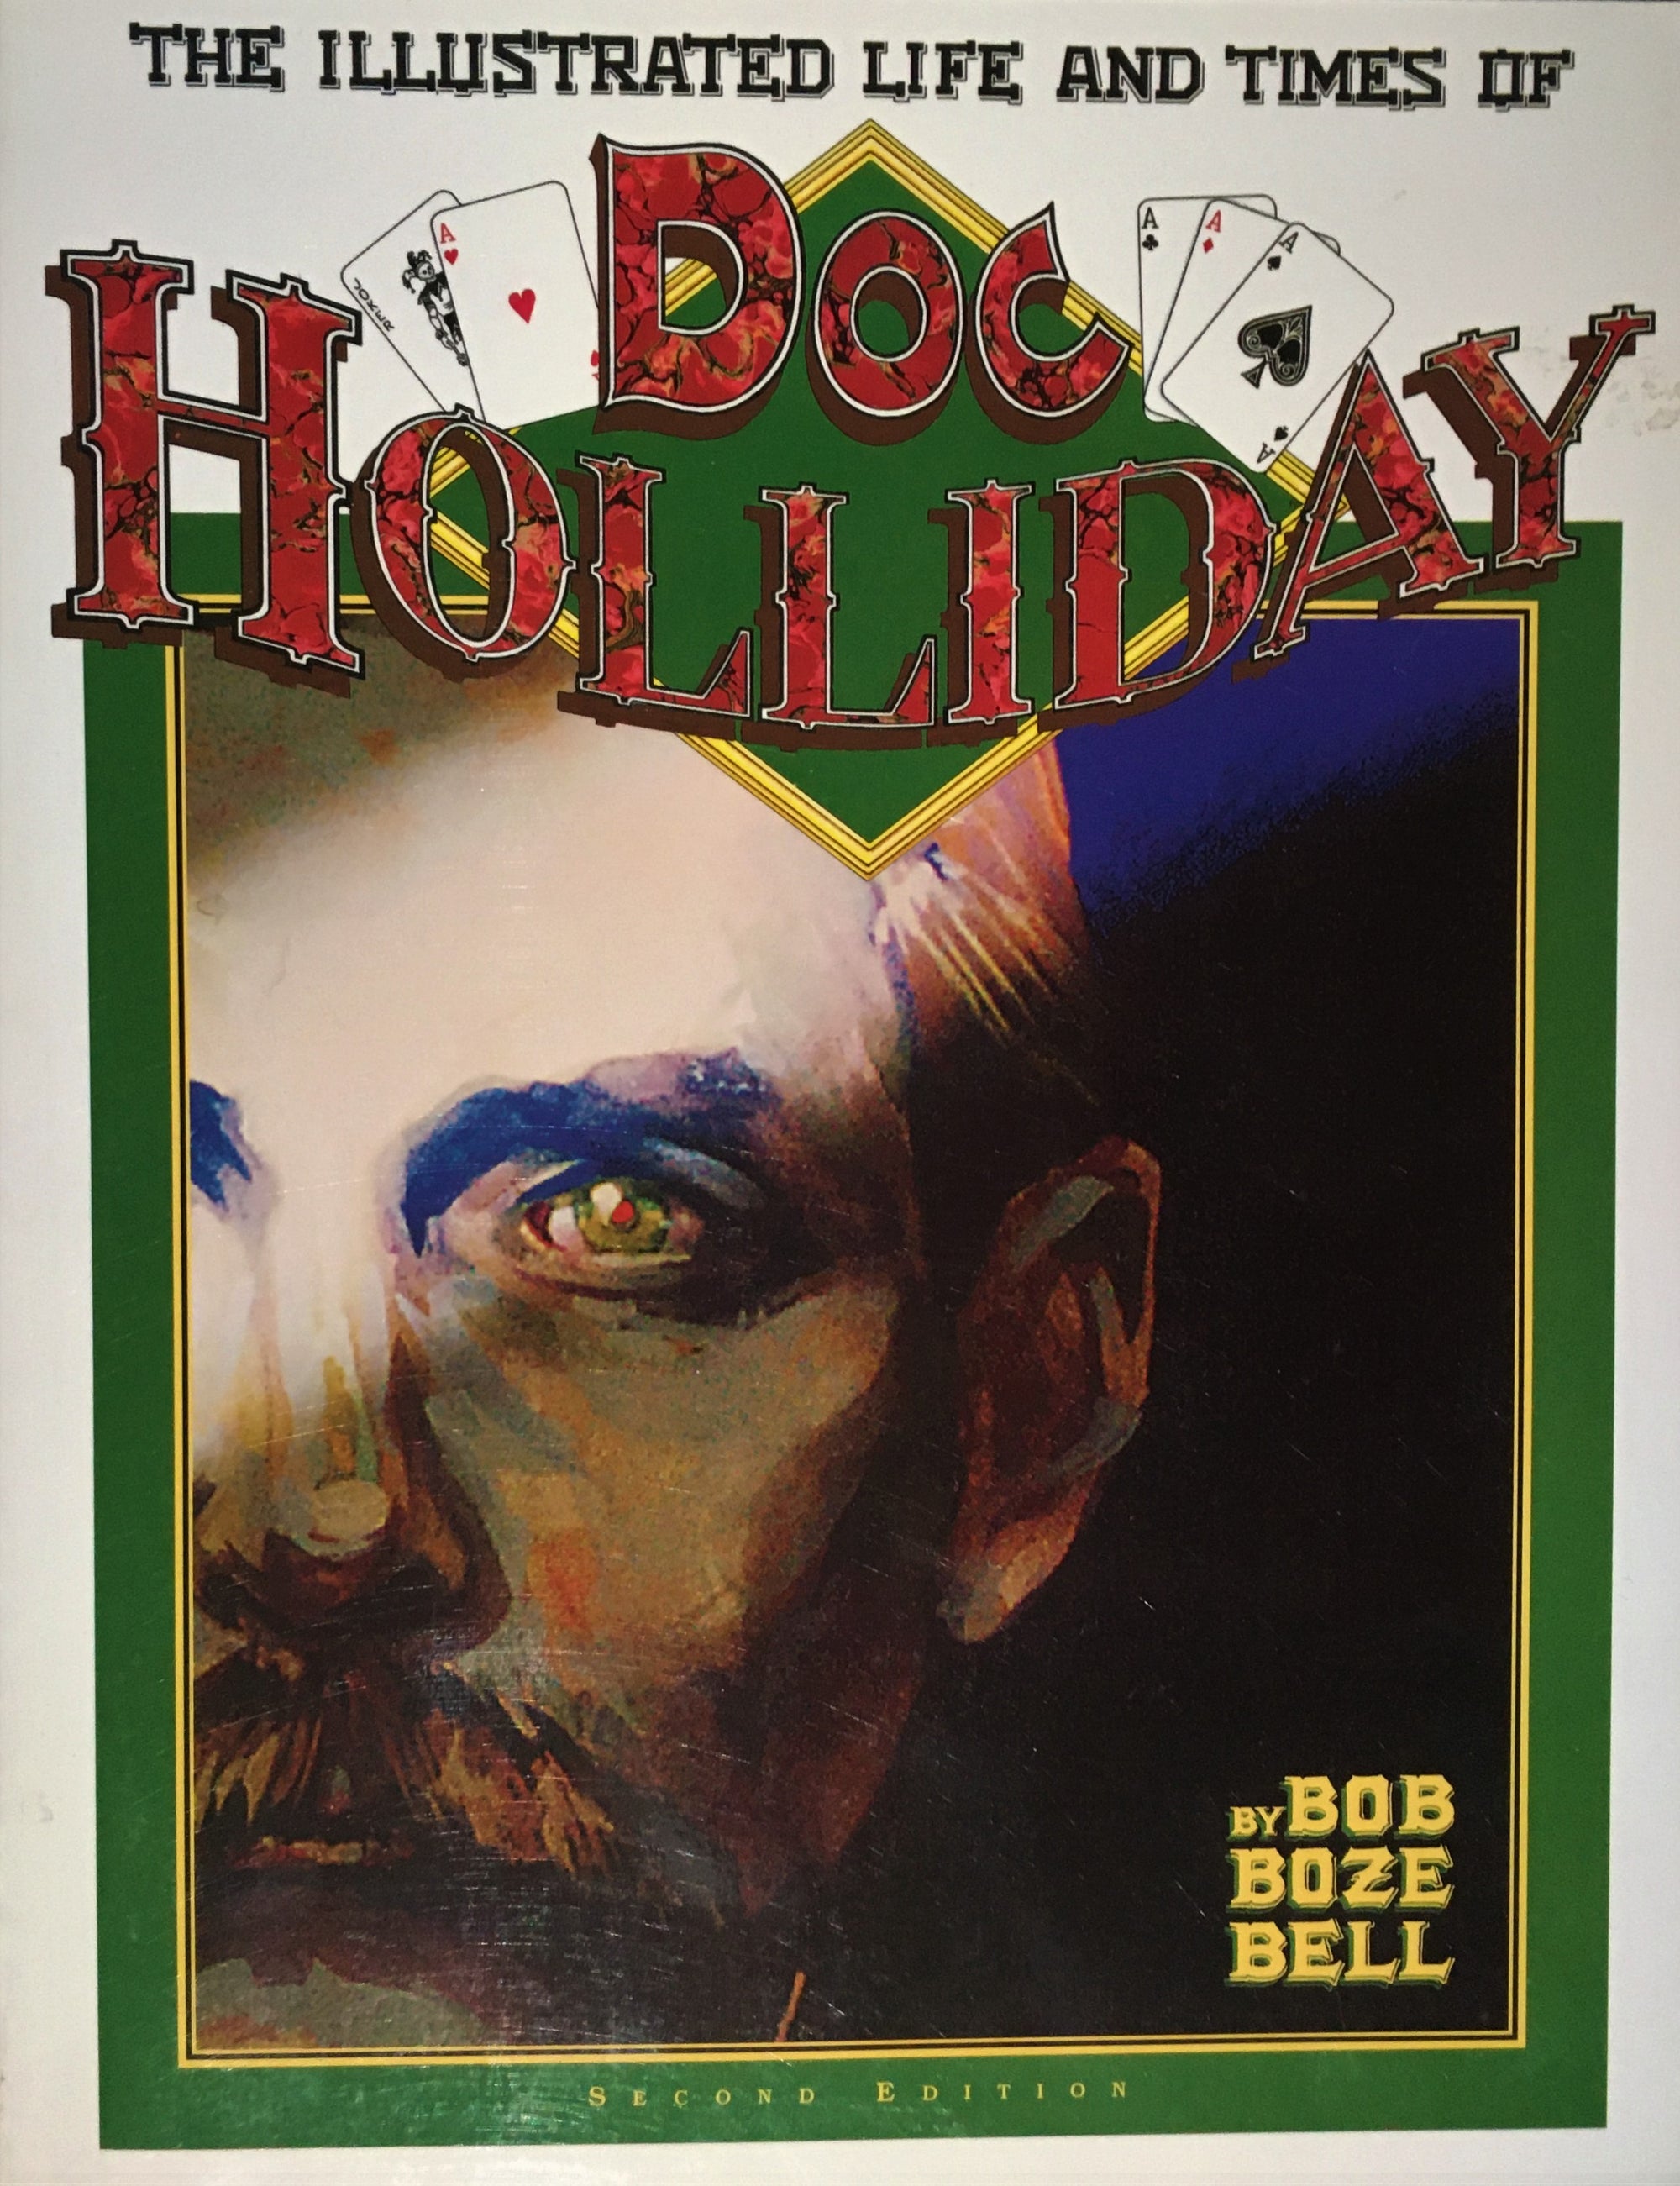 The Illustrated Life and Times of Doc Holliday by Bob Boze Bell Book Cover